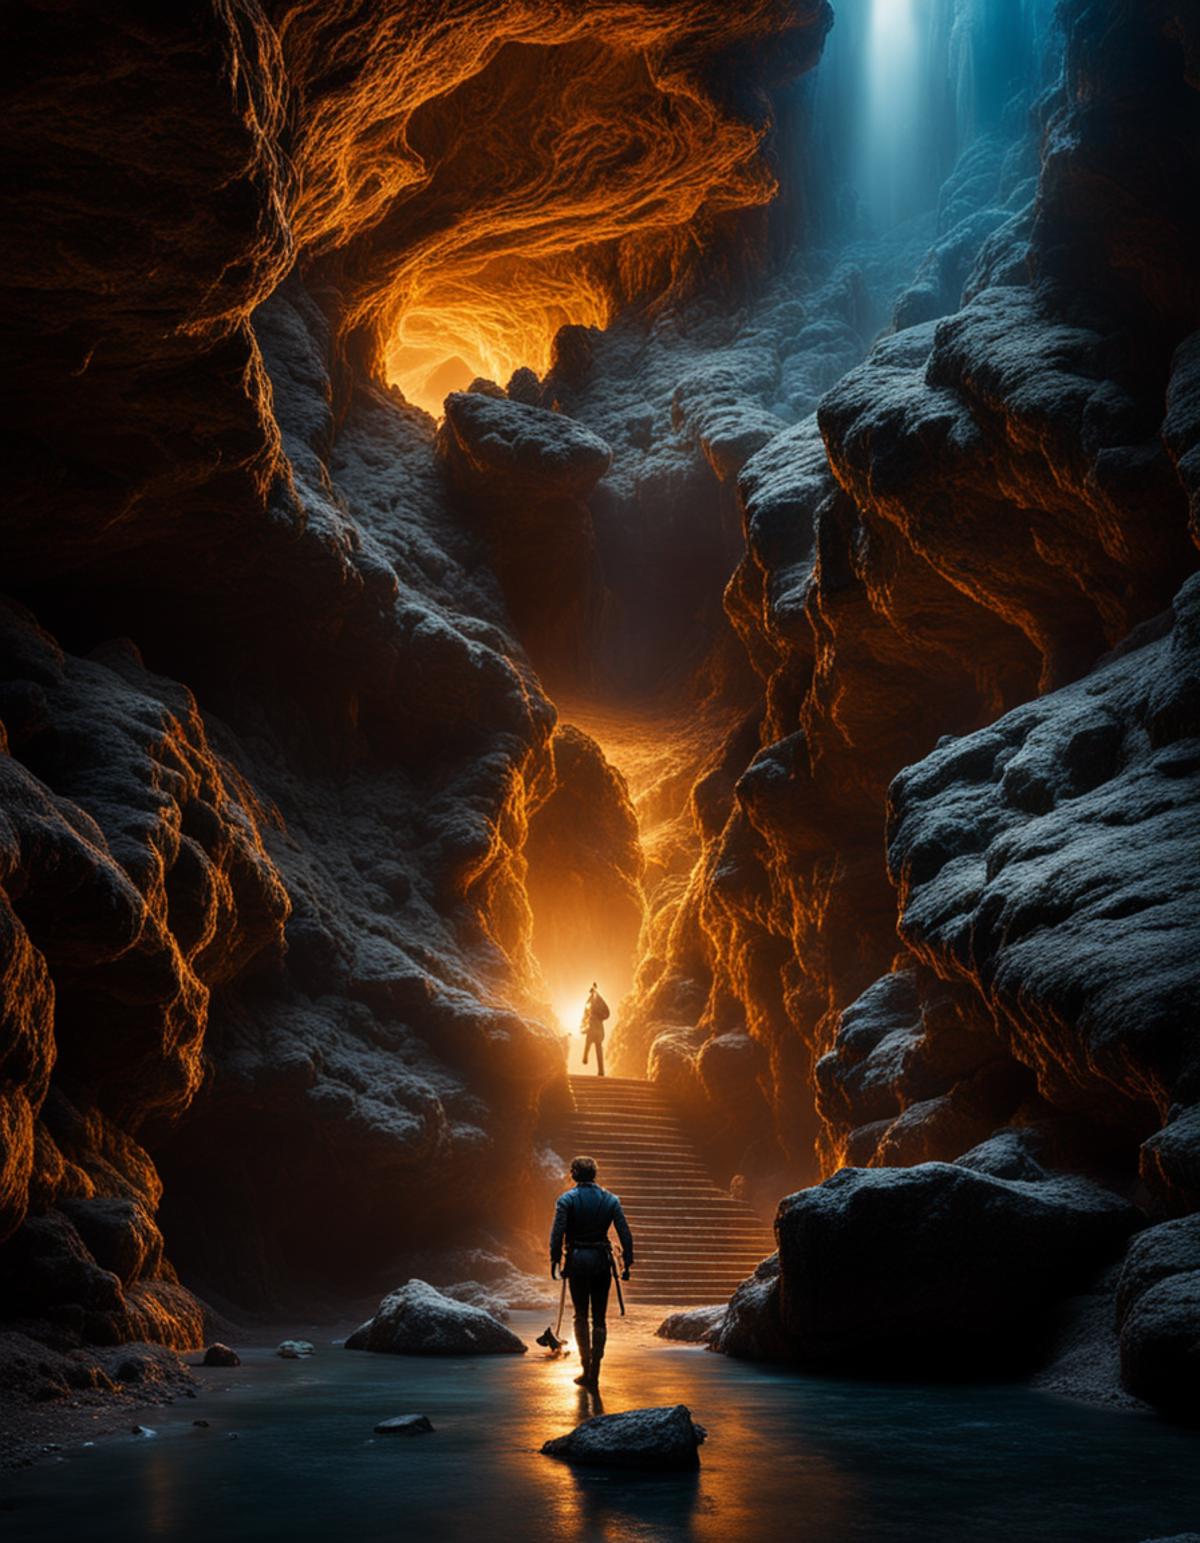 A Graphic Art Image of a Man Walking in a Cave